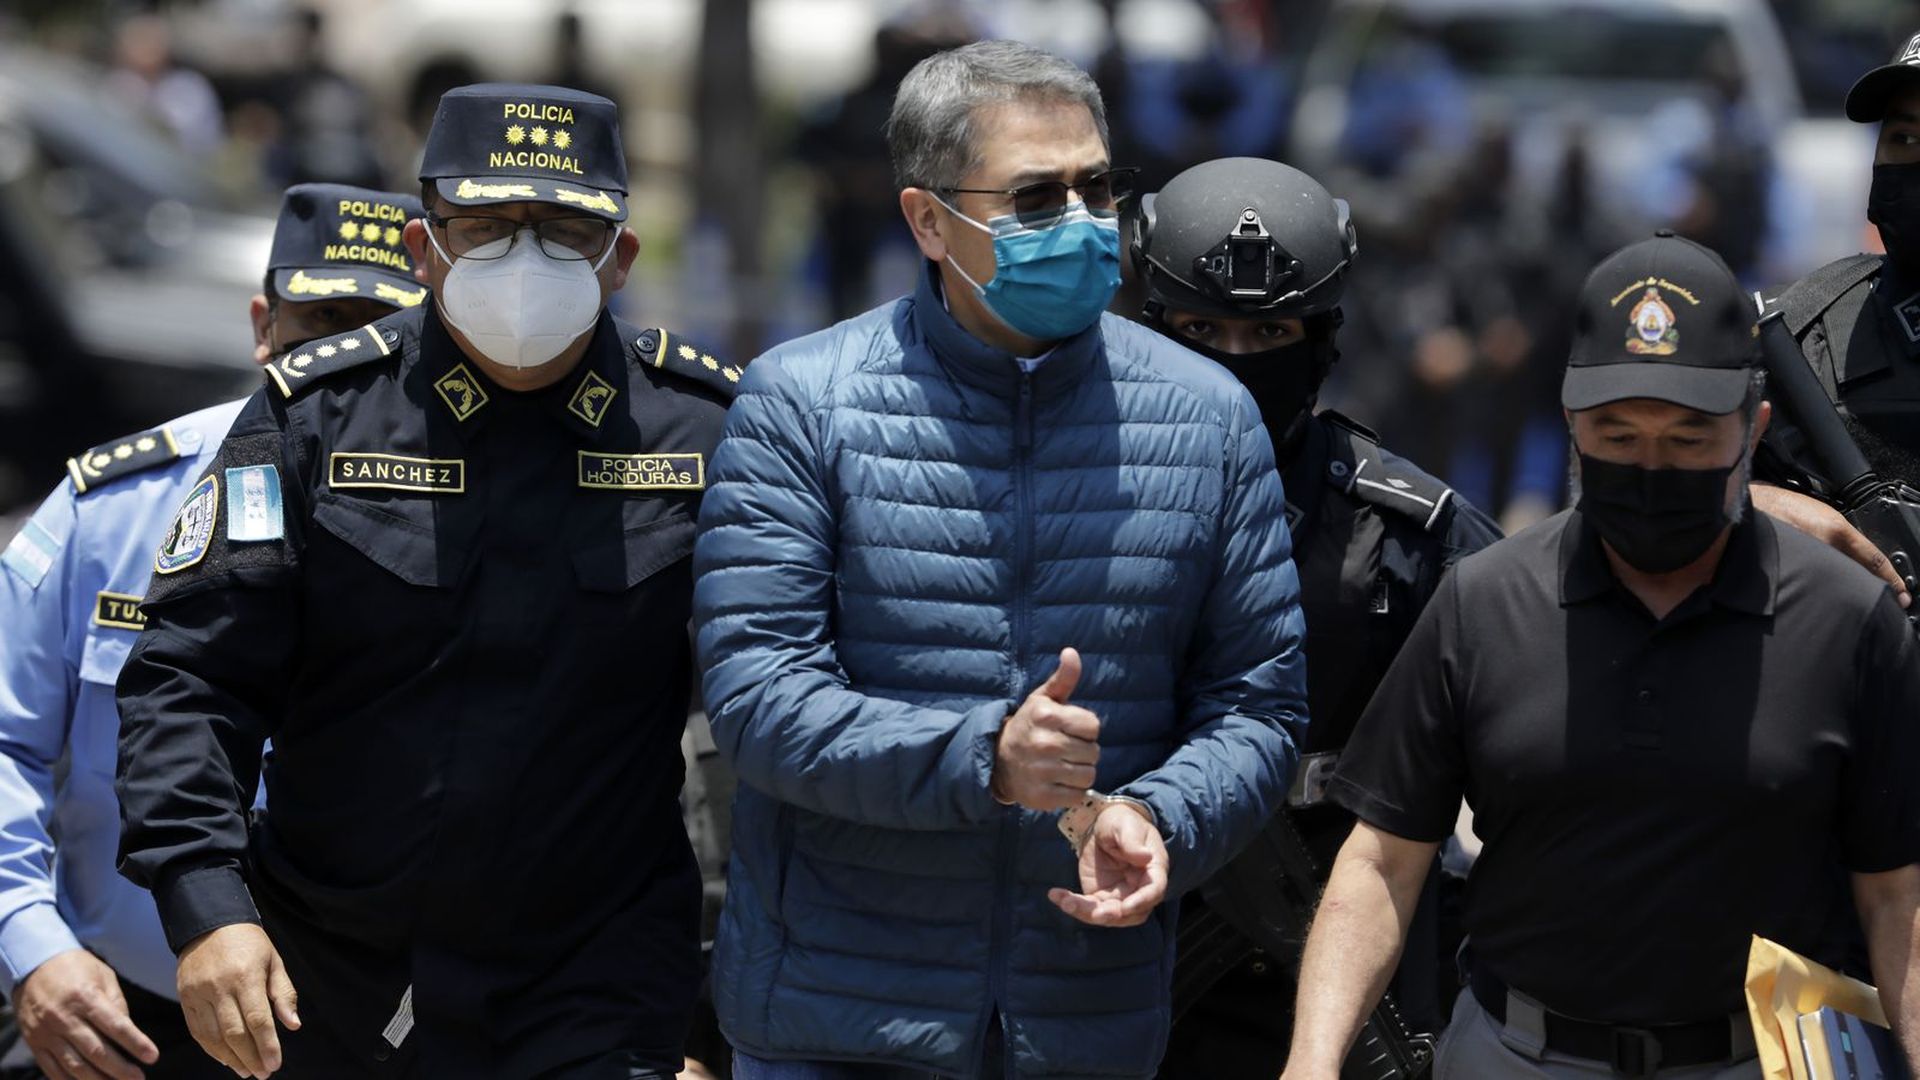 Former Honduras president Juan Orlando Hernandez walks while handcuffed at the front and surrounded by masked police officers 